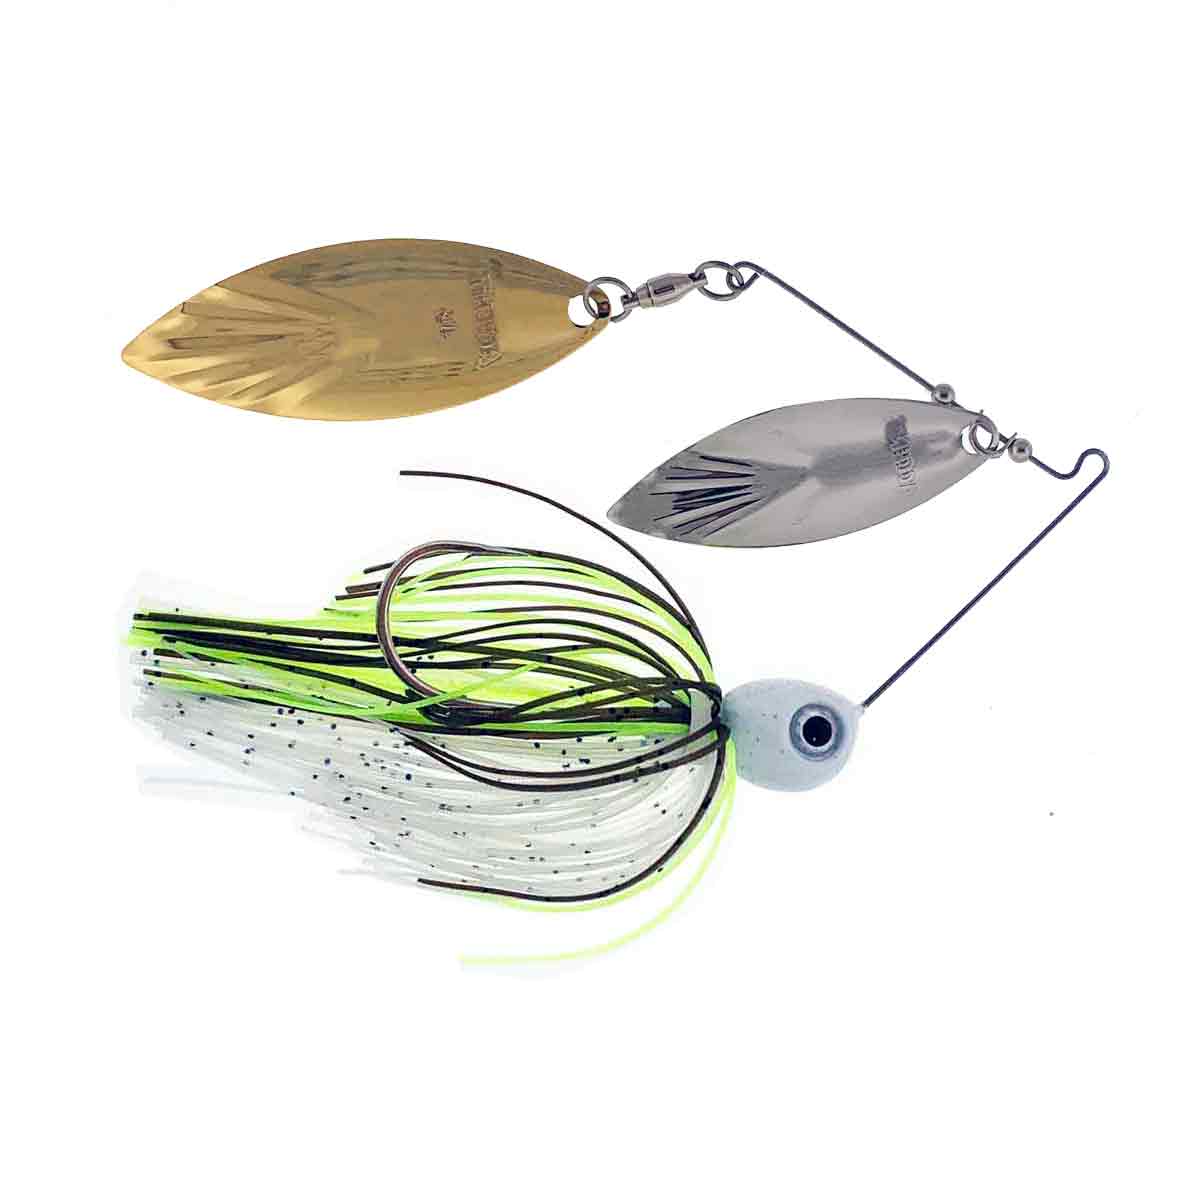 Mark Dove River Special Double Willow Spinnerbait_Threadfin Shad - Nickel/Gold